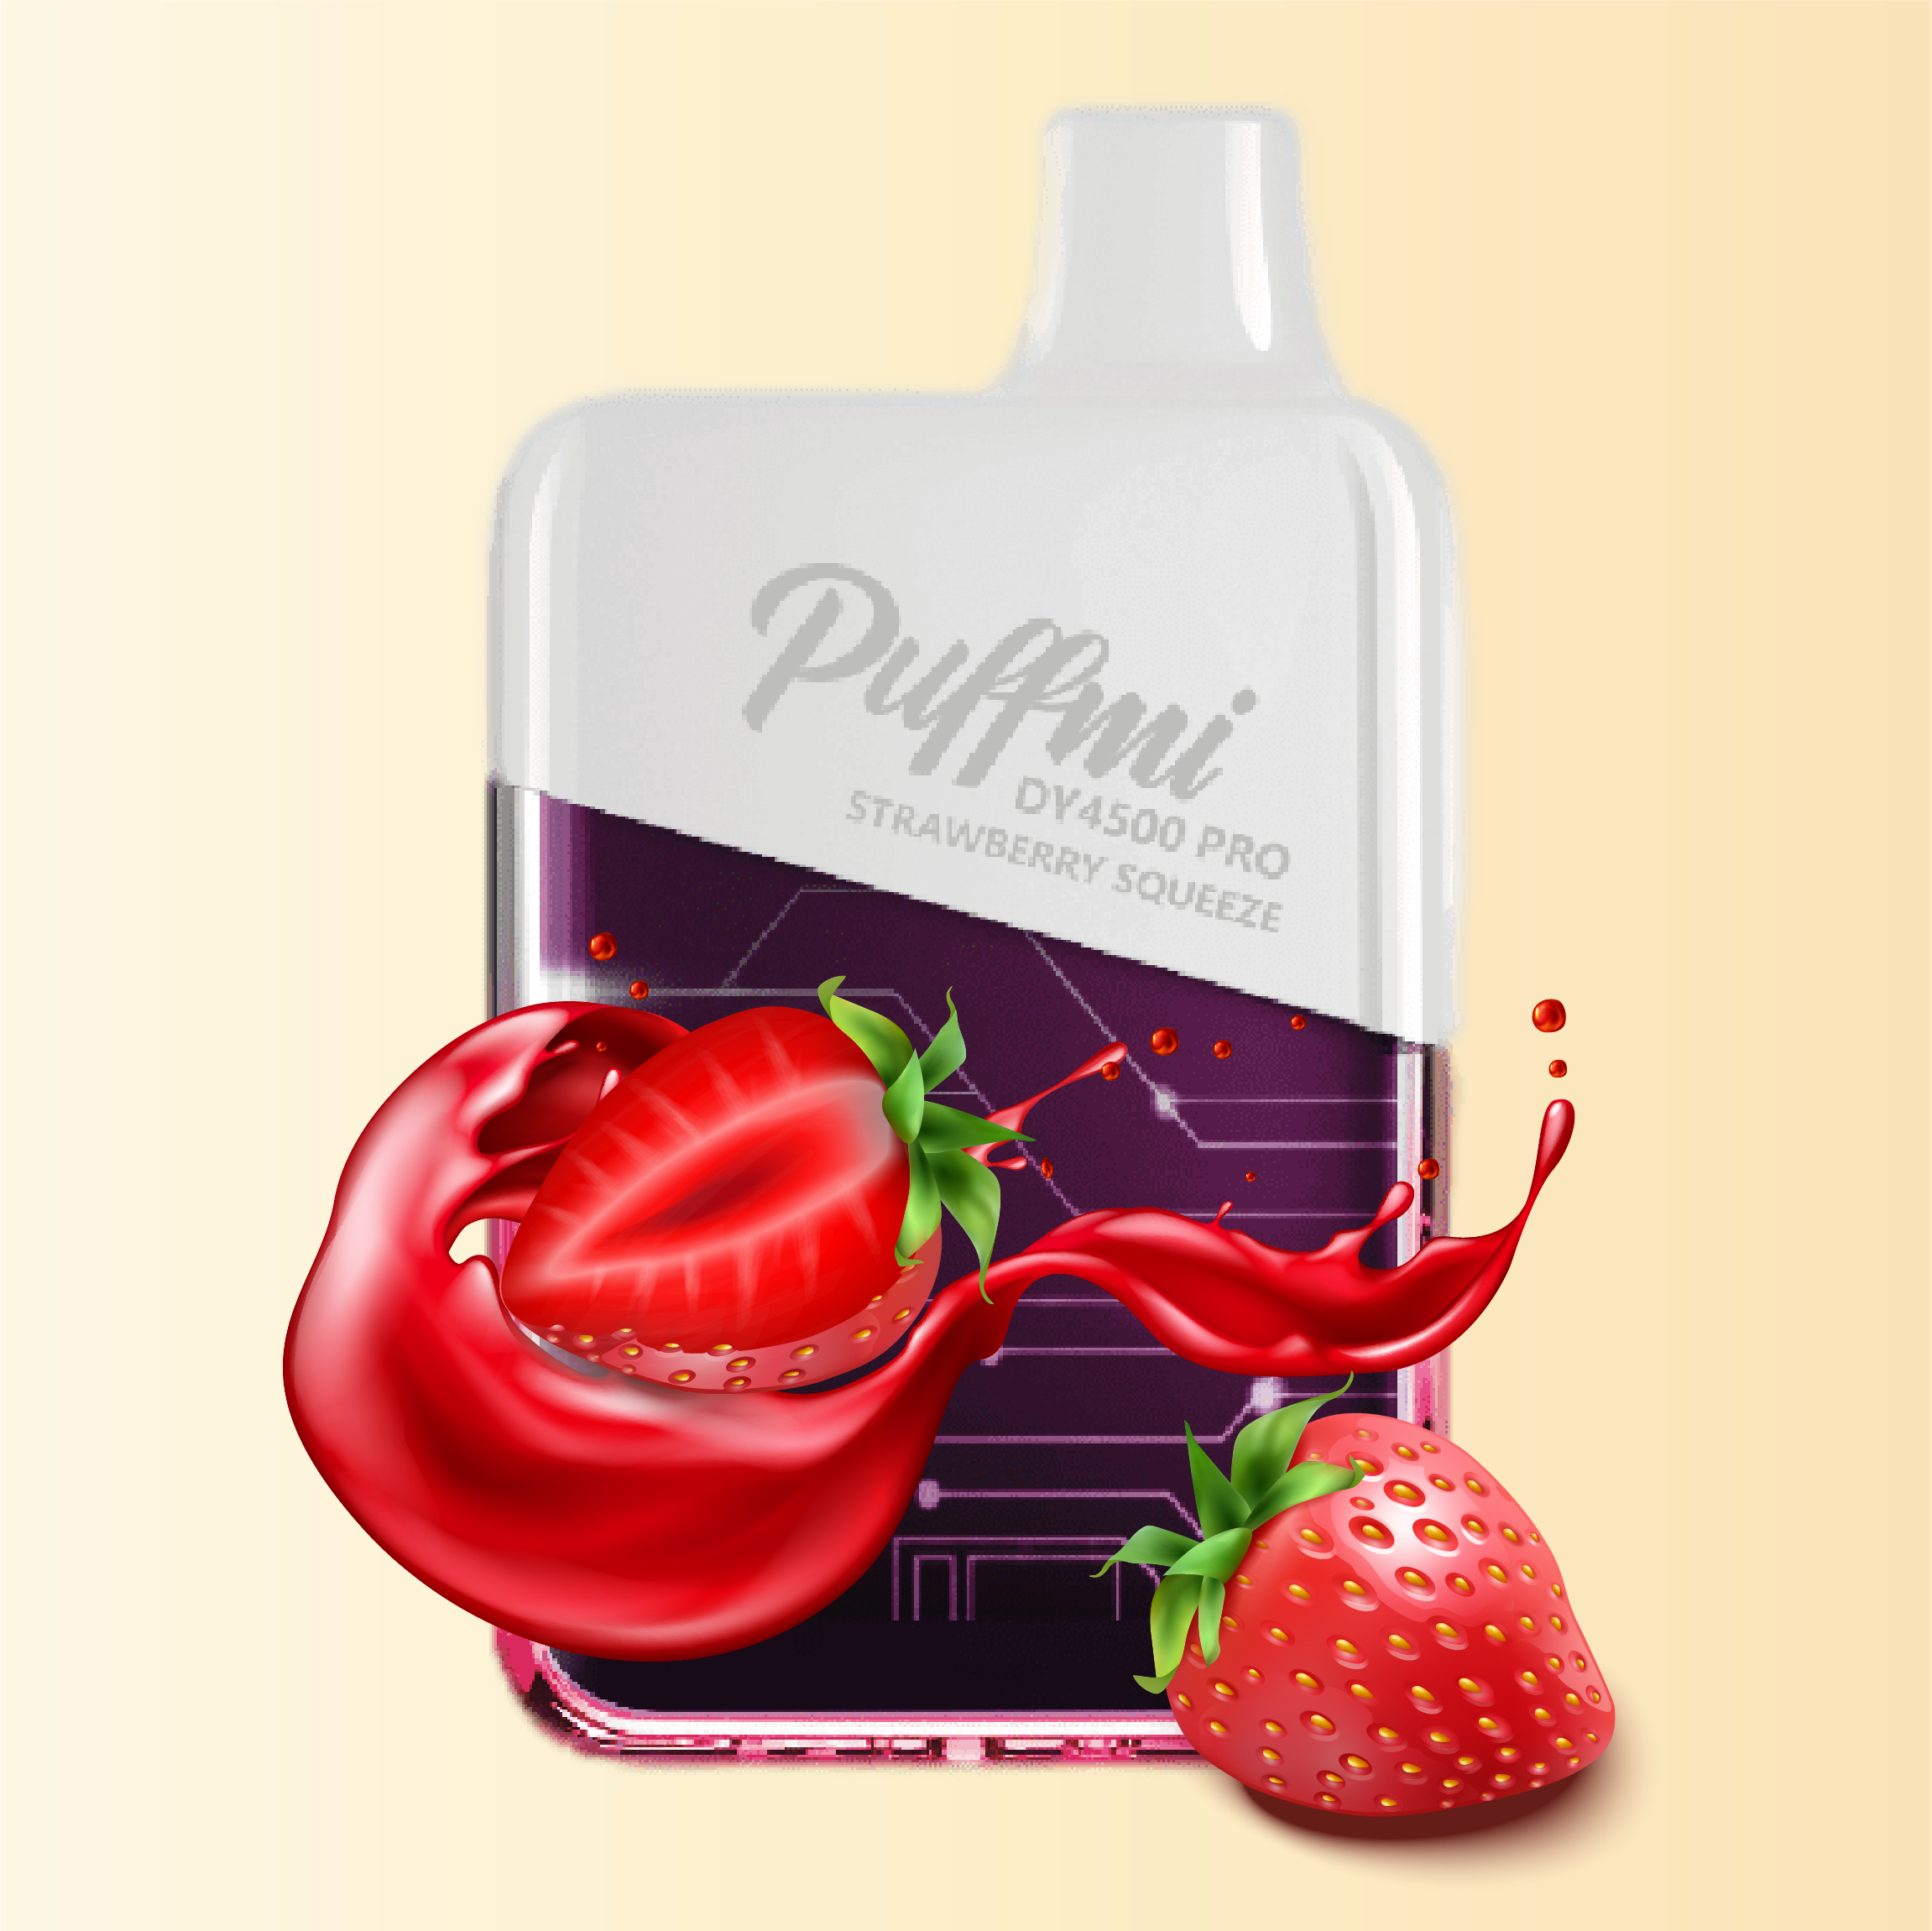 PUFFMI DY4500 PRO / Strawberry Squeezy